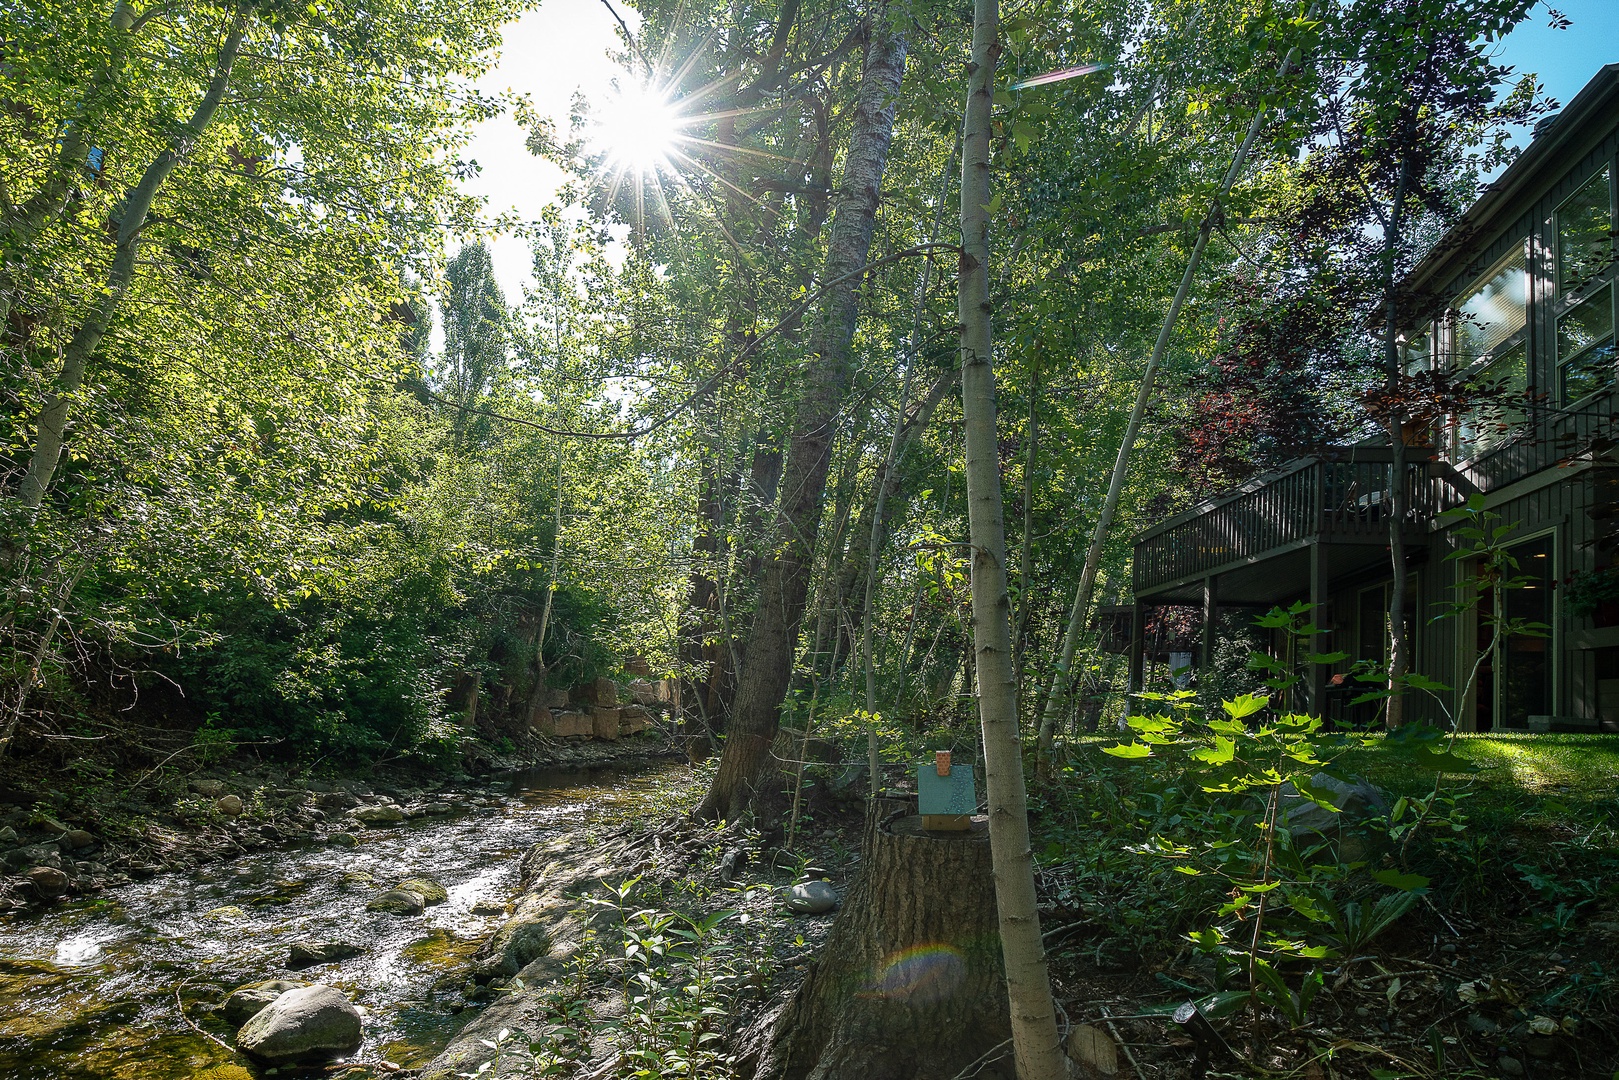 Ketchum Vacation Rentals, Bridgepoint Charm - Listen to the relaxing sounds of the water gently flowing over the stones